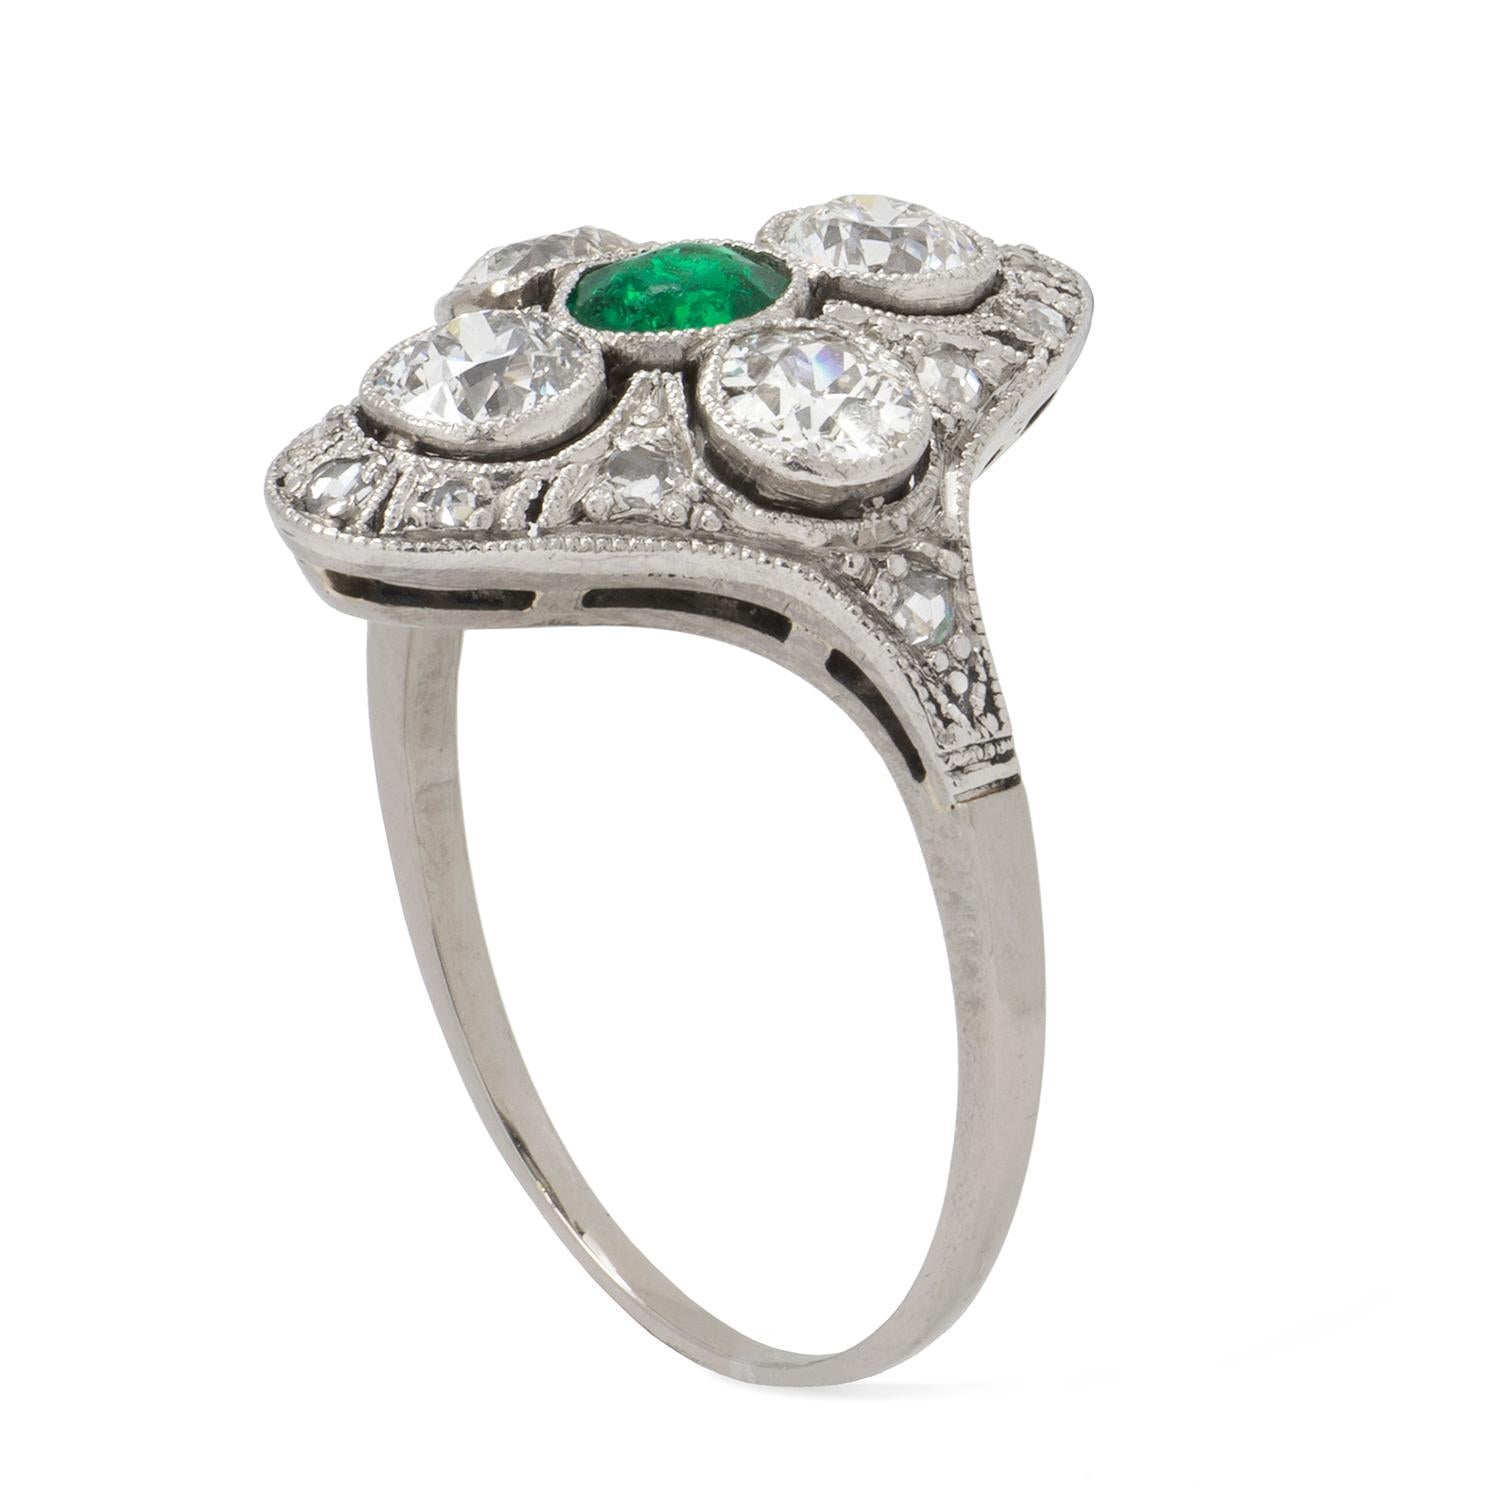 A turn of the century emerald and diamond plaque dress ring, the central emerald estimated to weigh 0.35 carat, vertically set with 4 old brilliant cut diamonds on the top, bottom and sides with further surround of smaller single cut diamonds